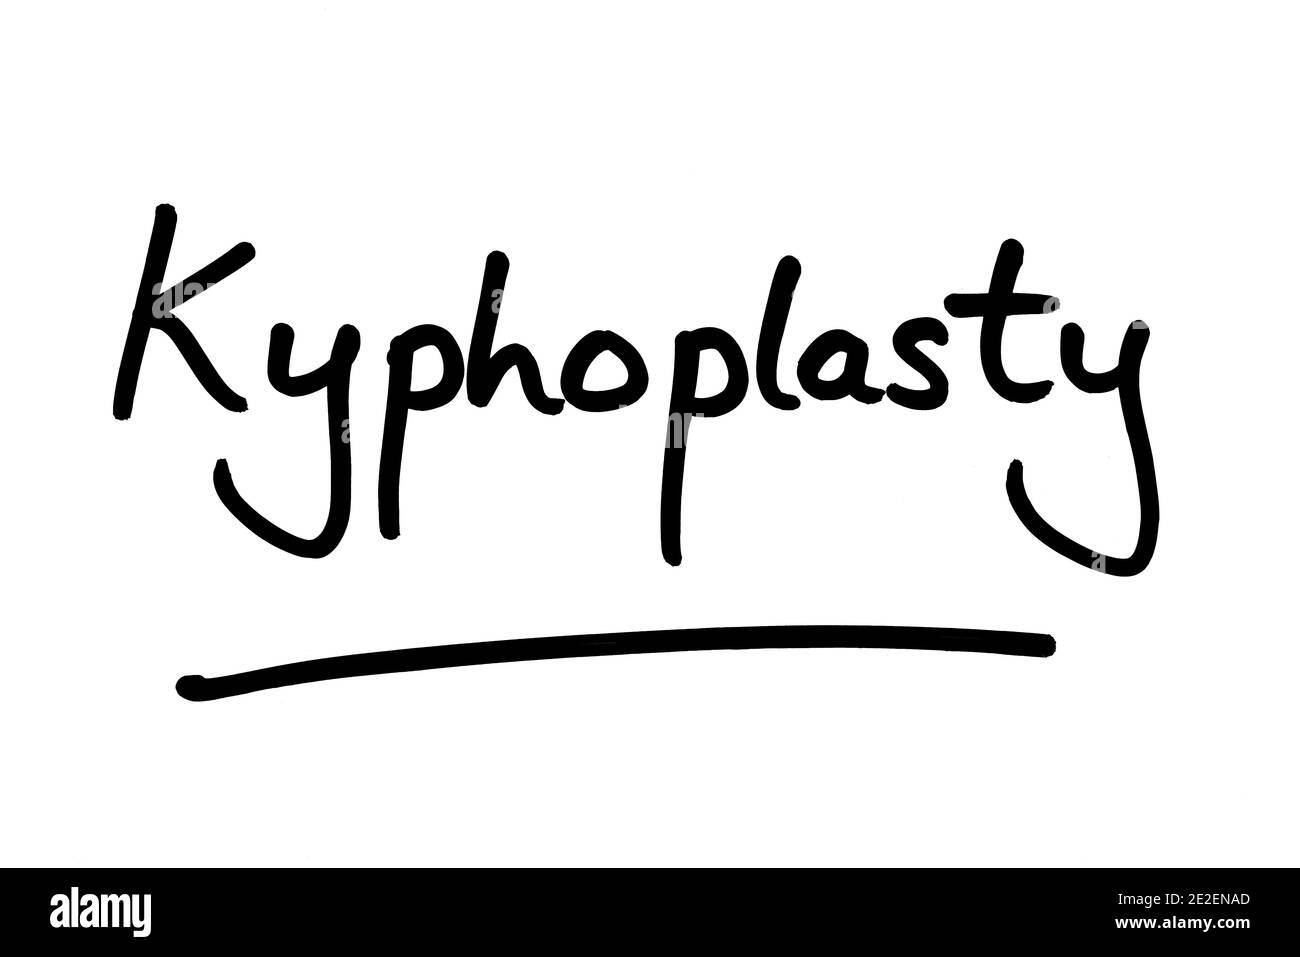 The term Kyphoplasty, handwritten on a white background. Stock Photo